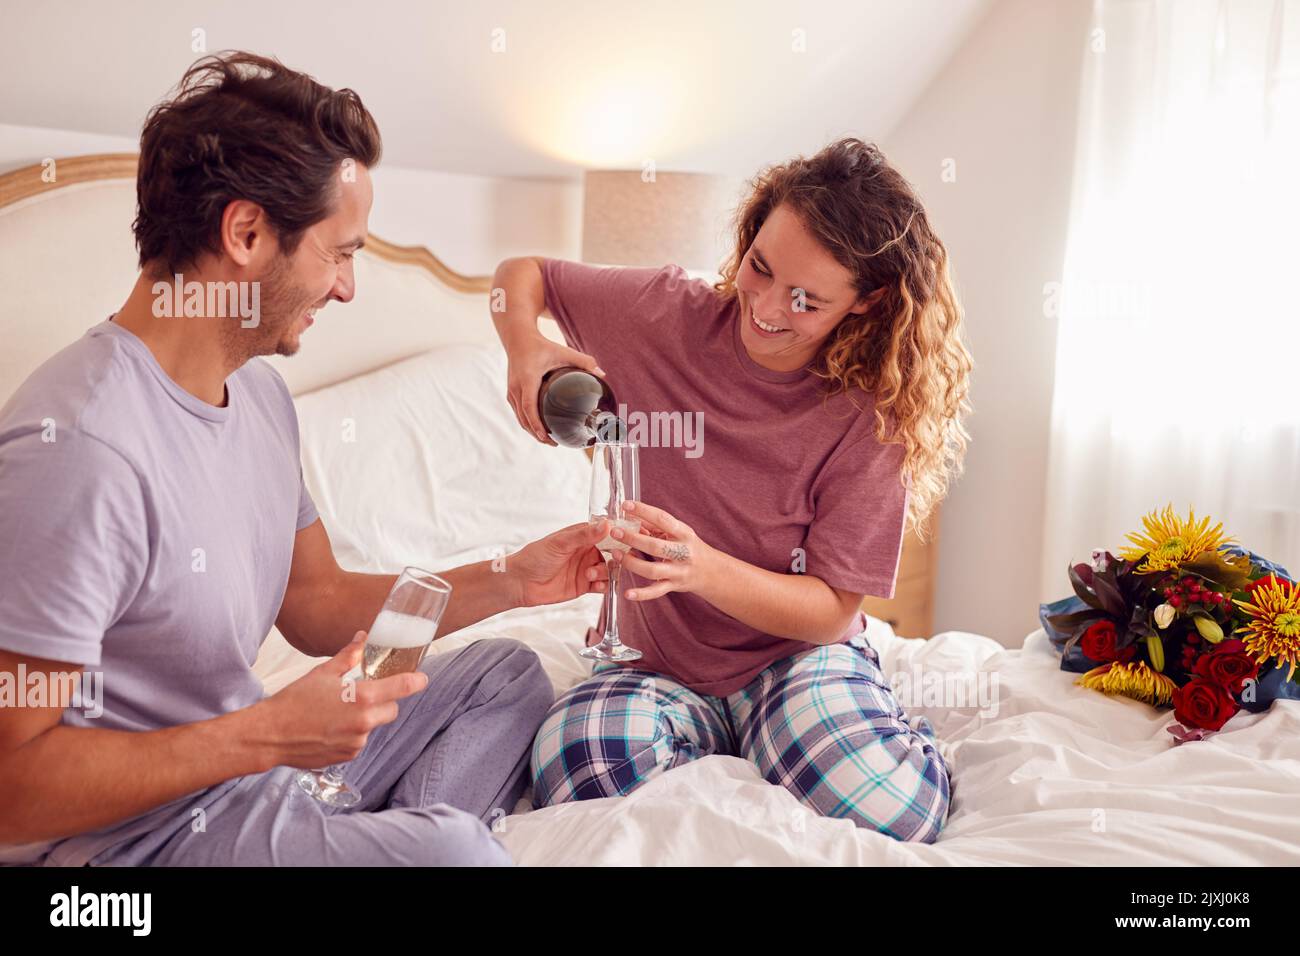 Loving Couple Wearing Pyjamas In Bed At Home Celebrating Birthday Or Anniversary With Champagne Stock Photo